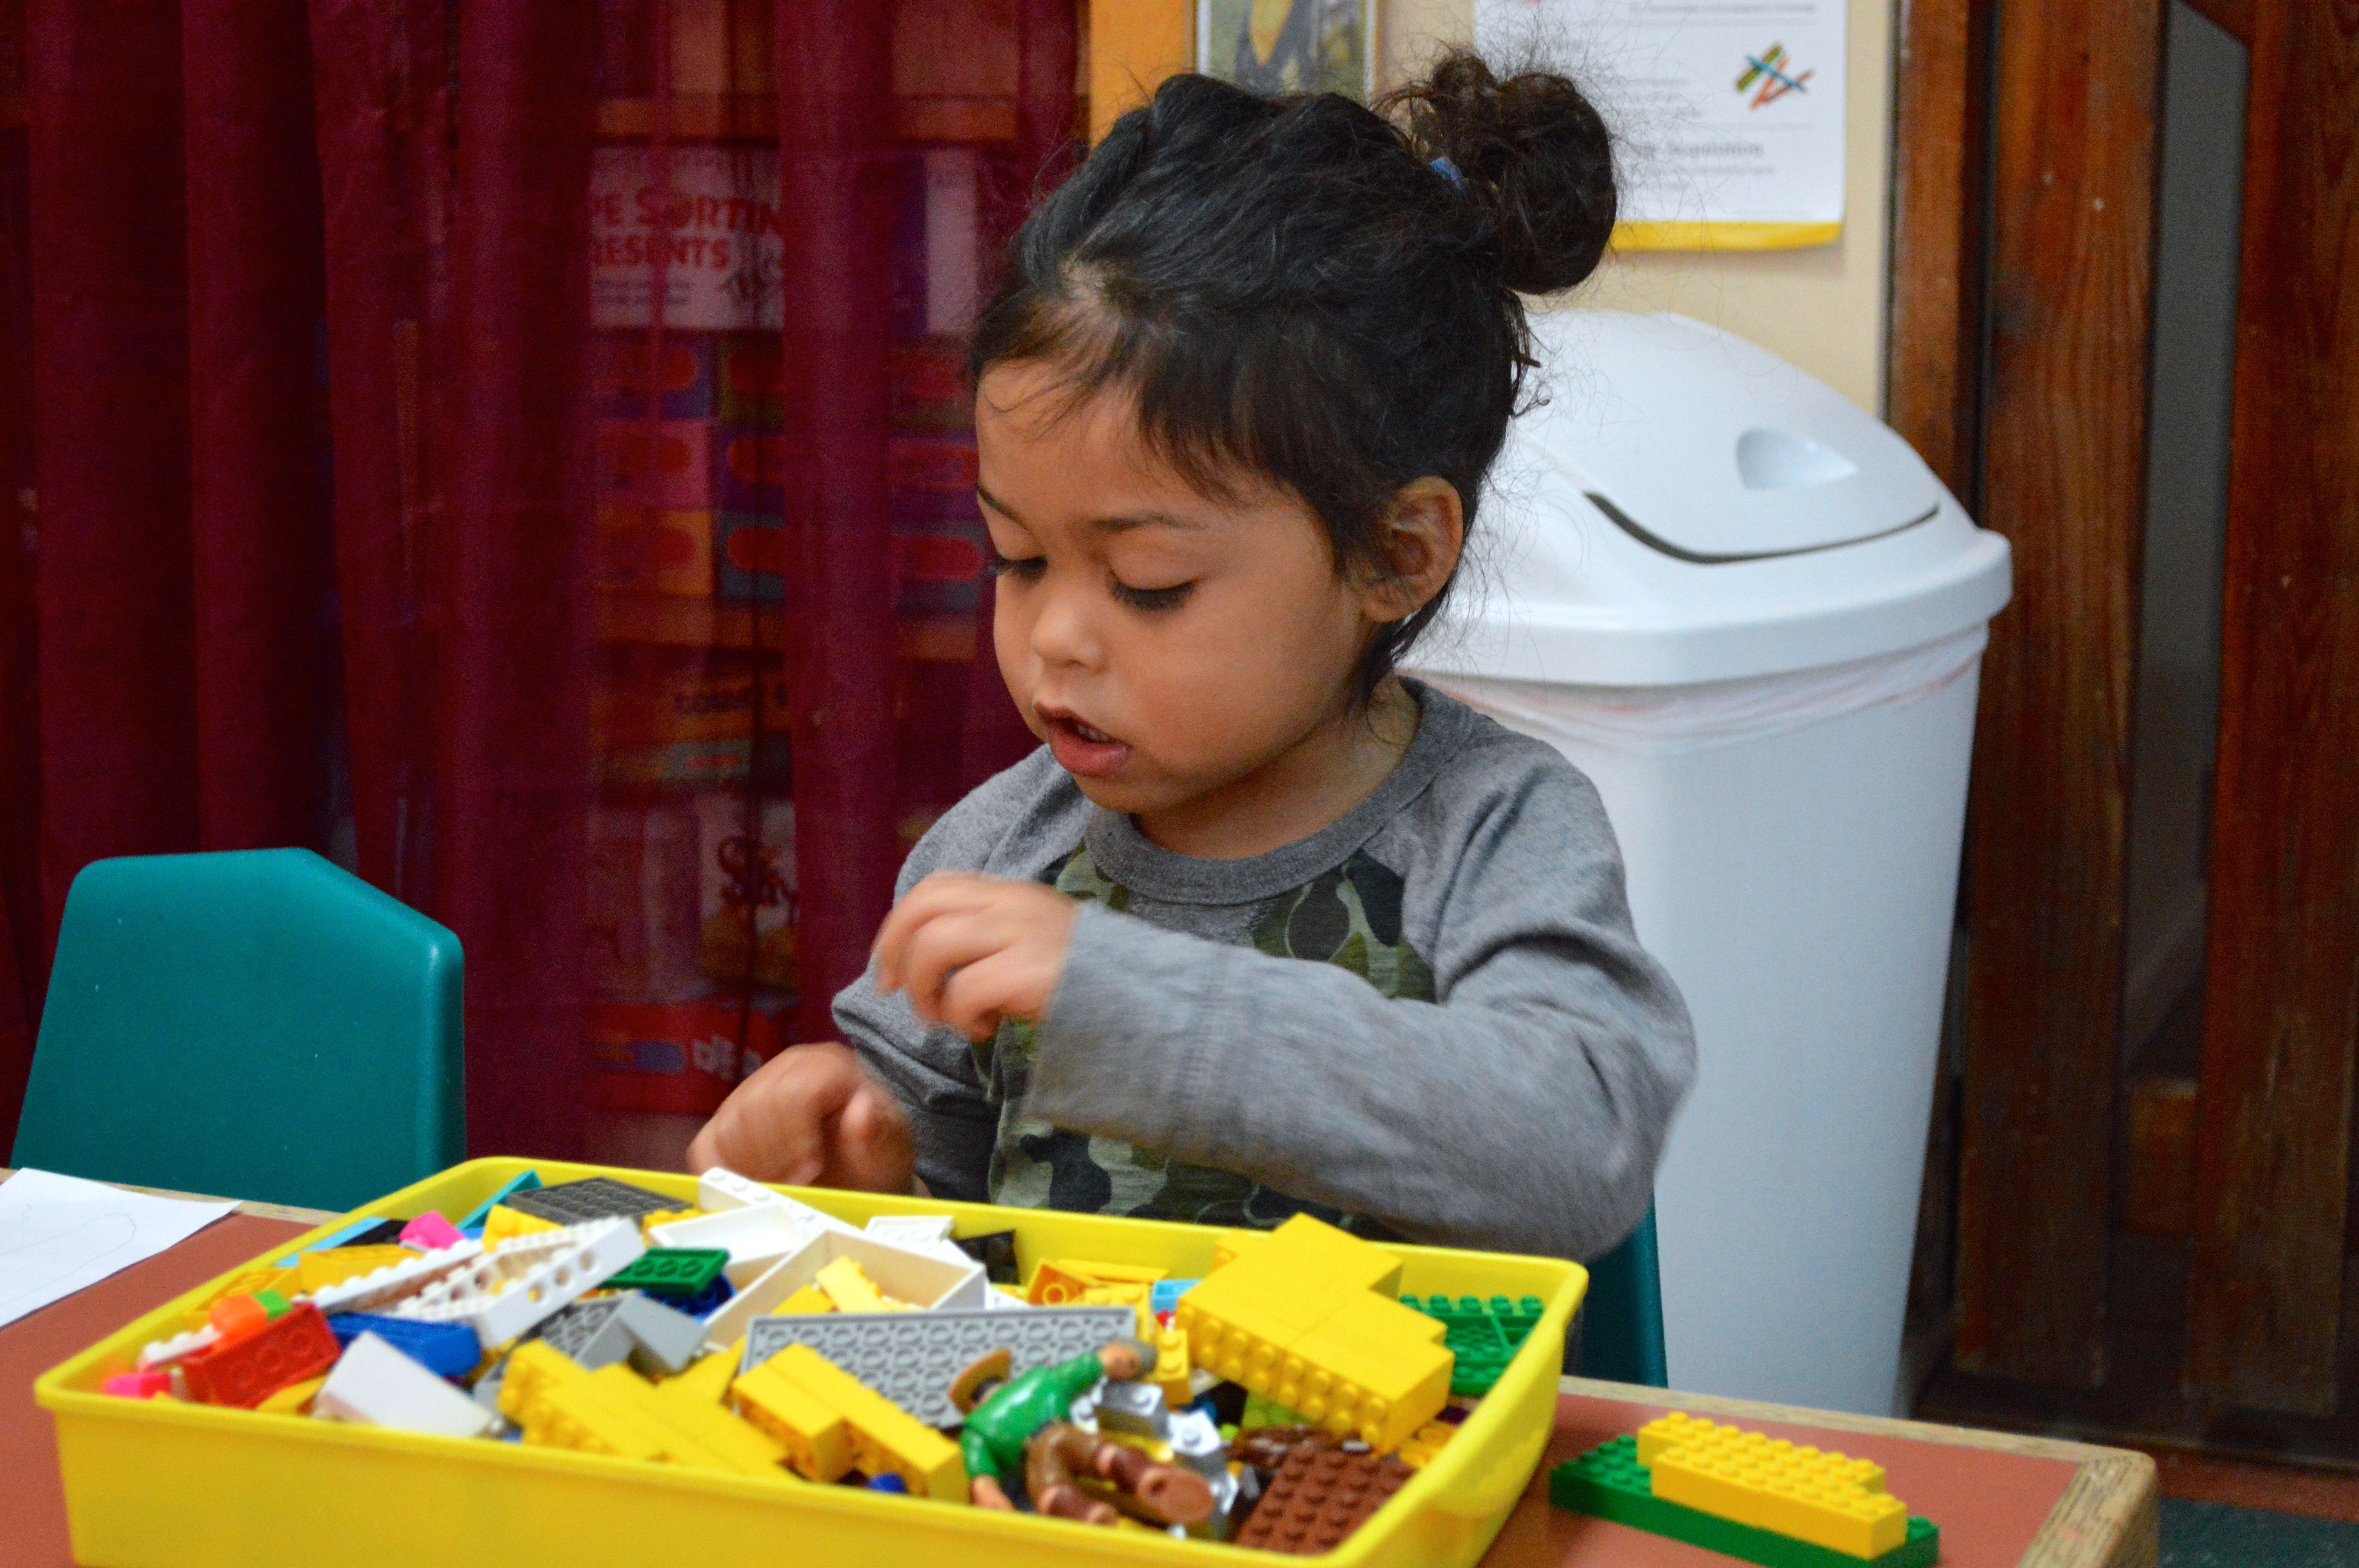 Dante plays with legos at the Sandbox Early Childhood Center. Photo by Shannon Higgins/Arizona Sonora News